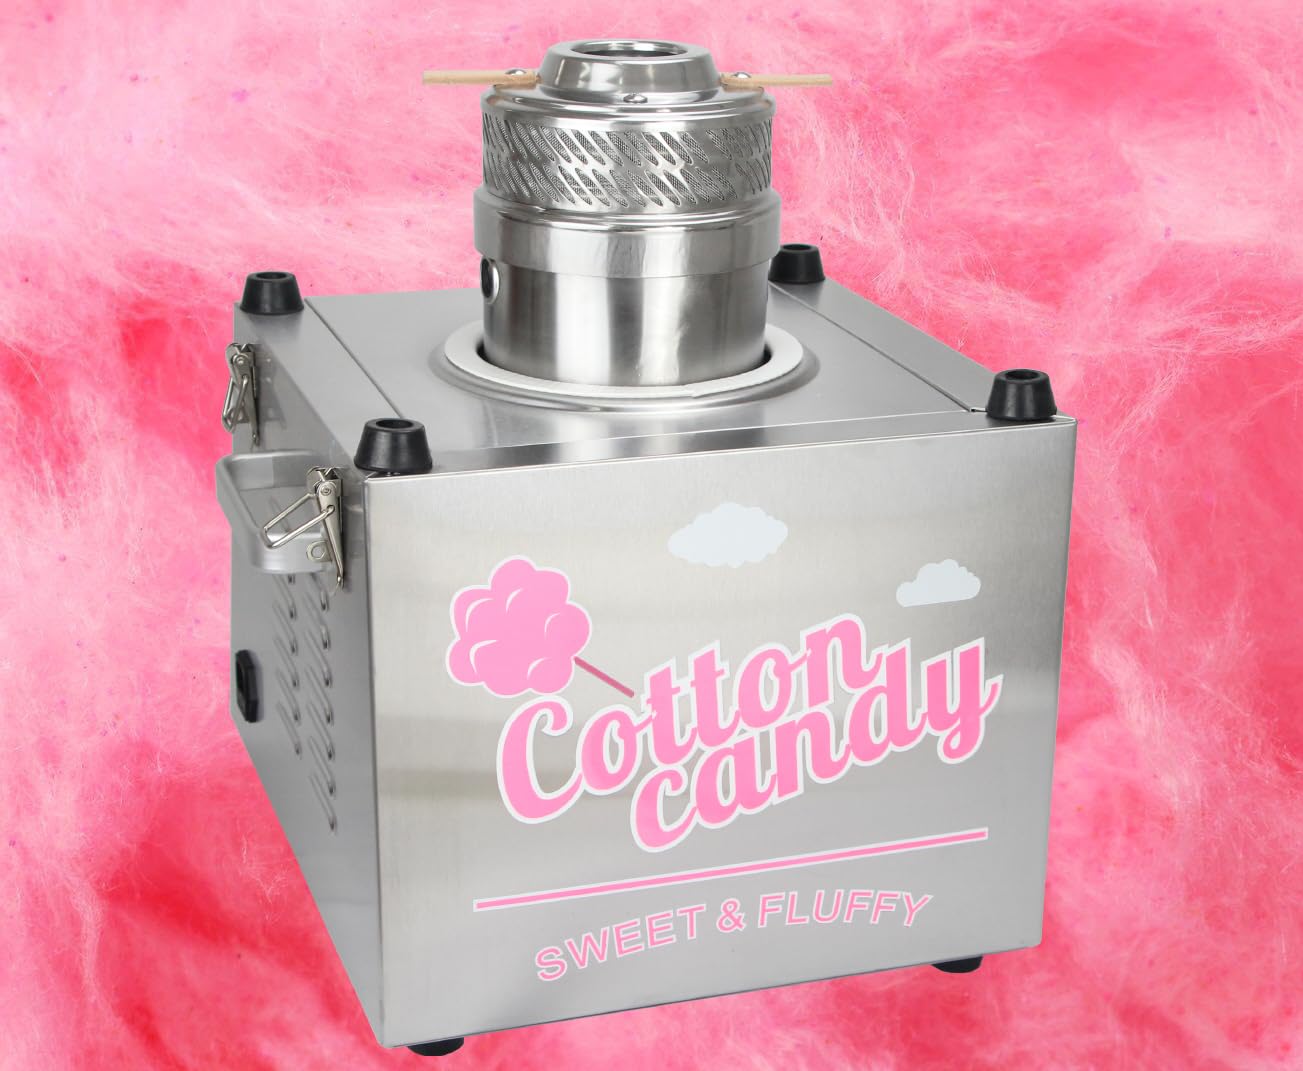 ANFIRE Commercial Professional Cotton Candy Machine 5